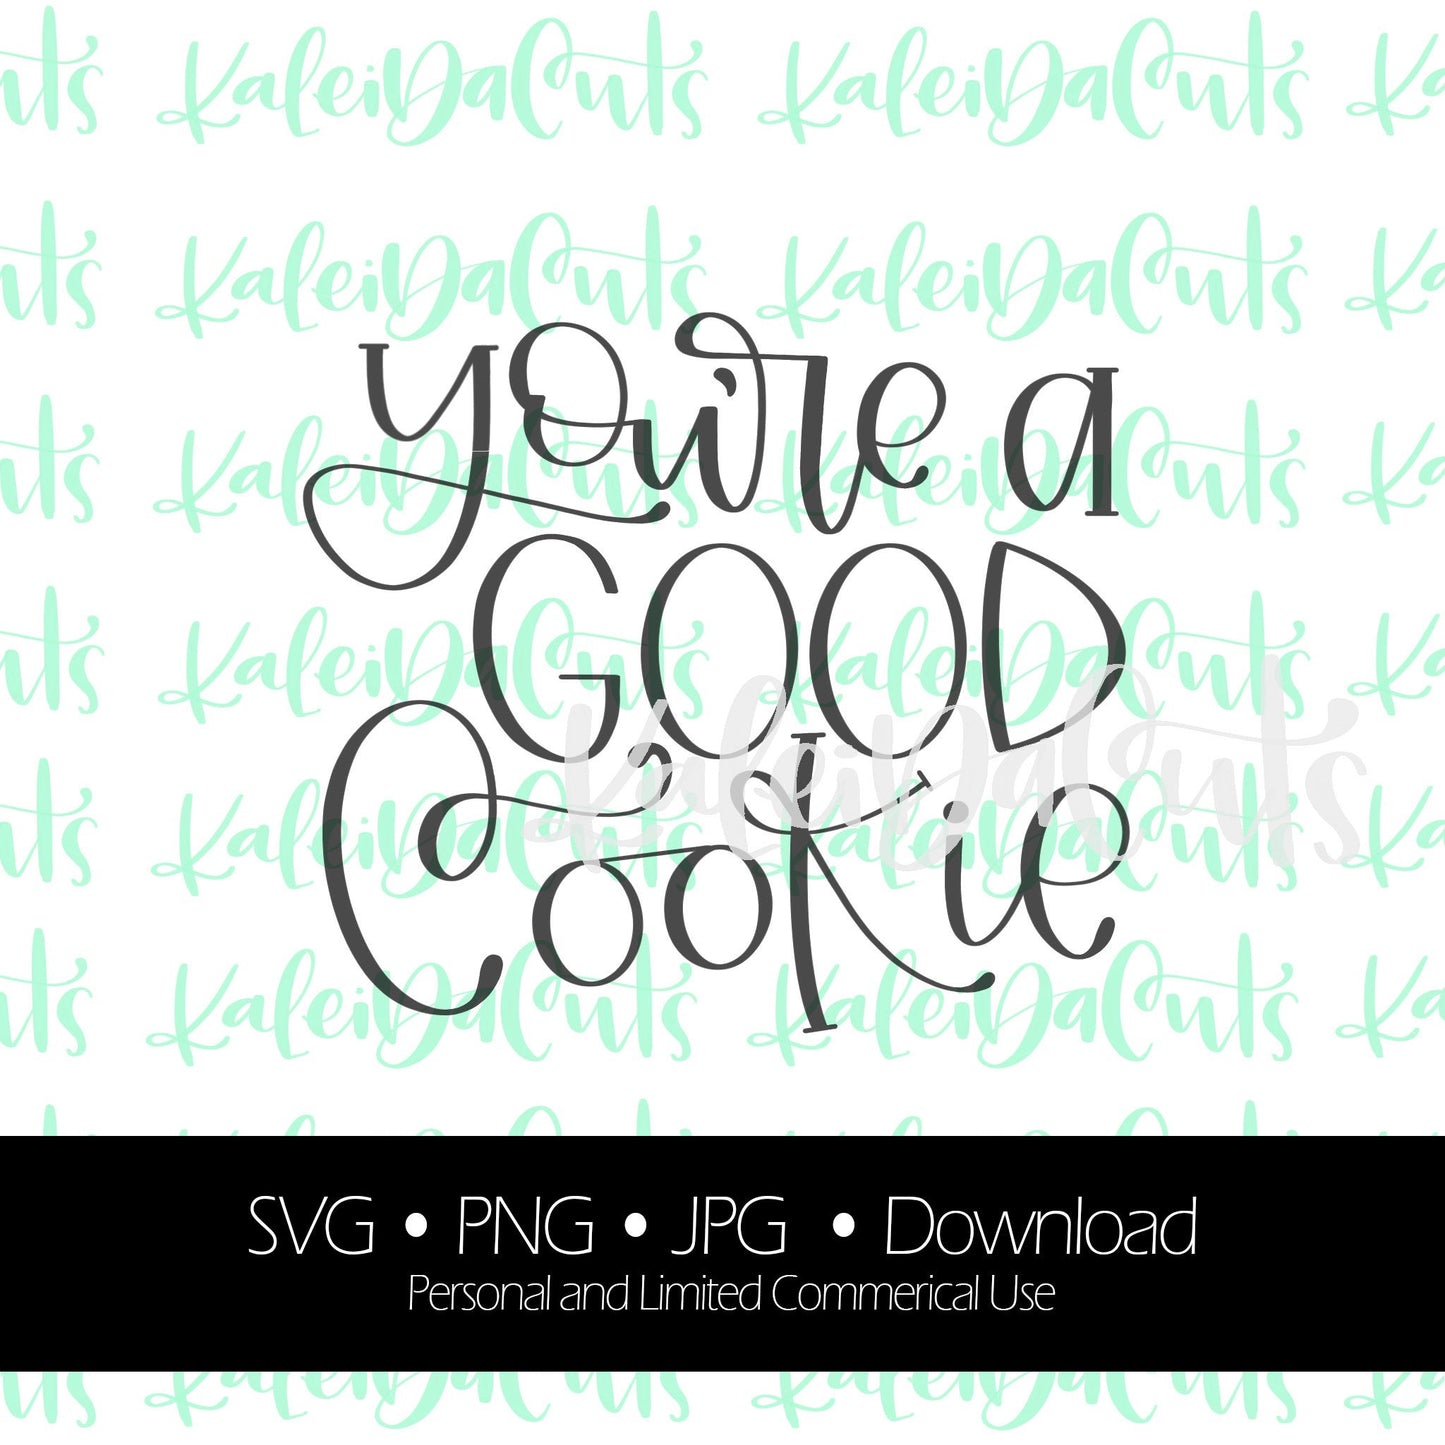 You're a Good Cookie Digital Download.